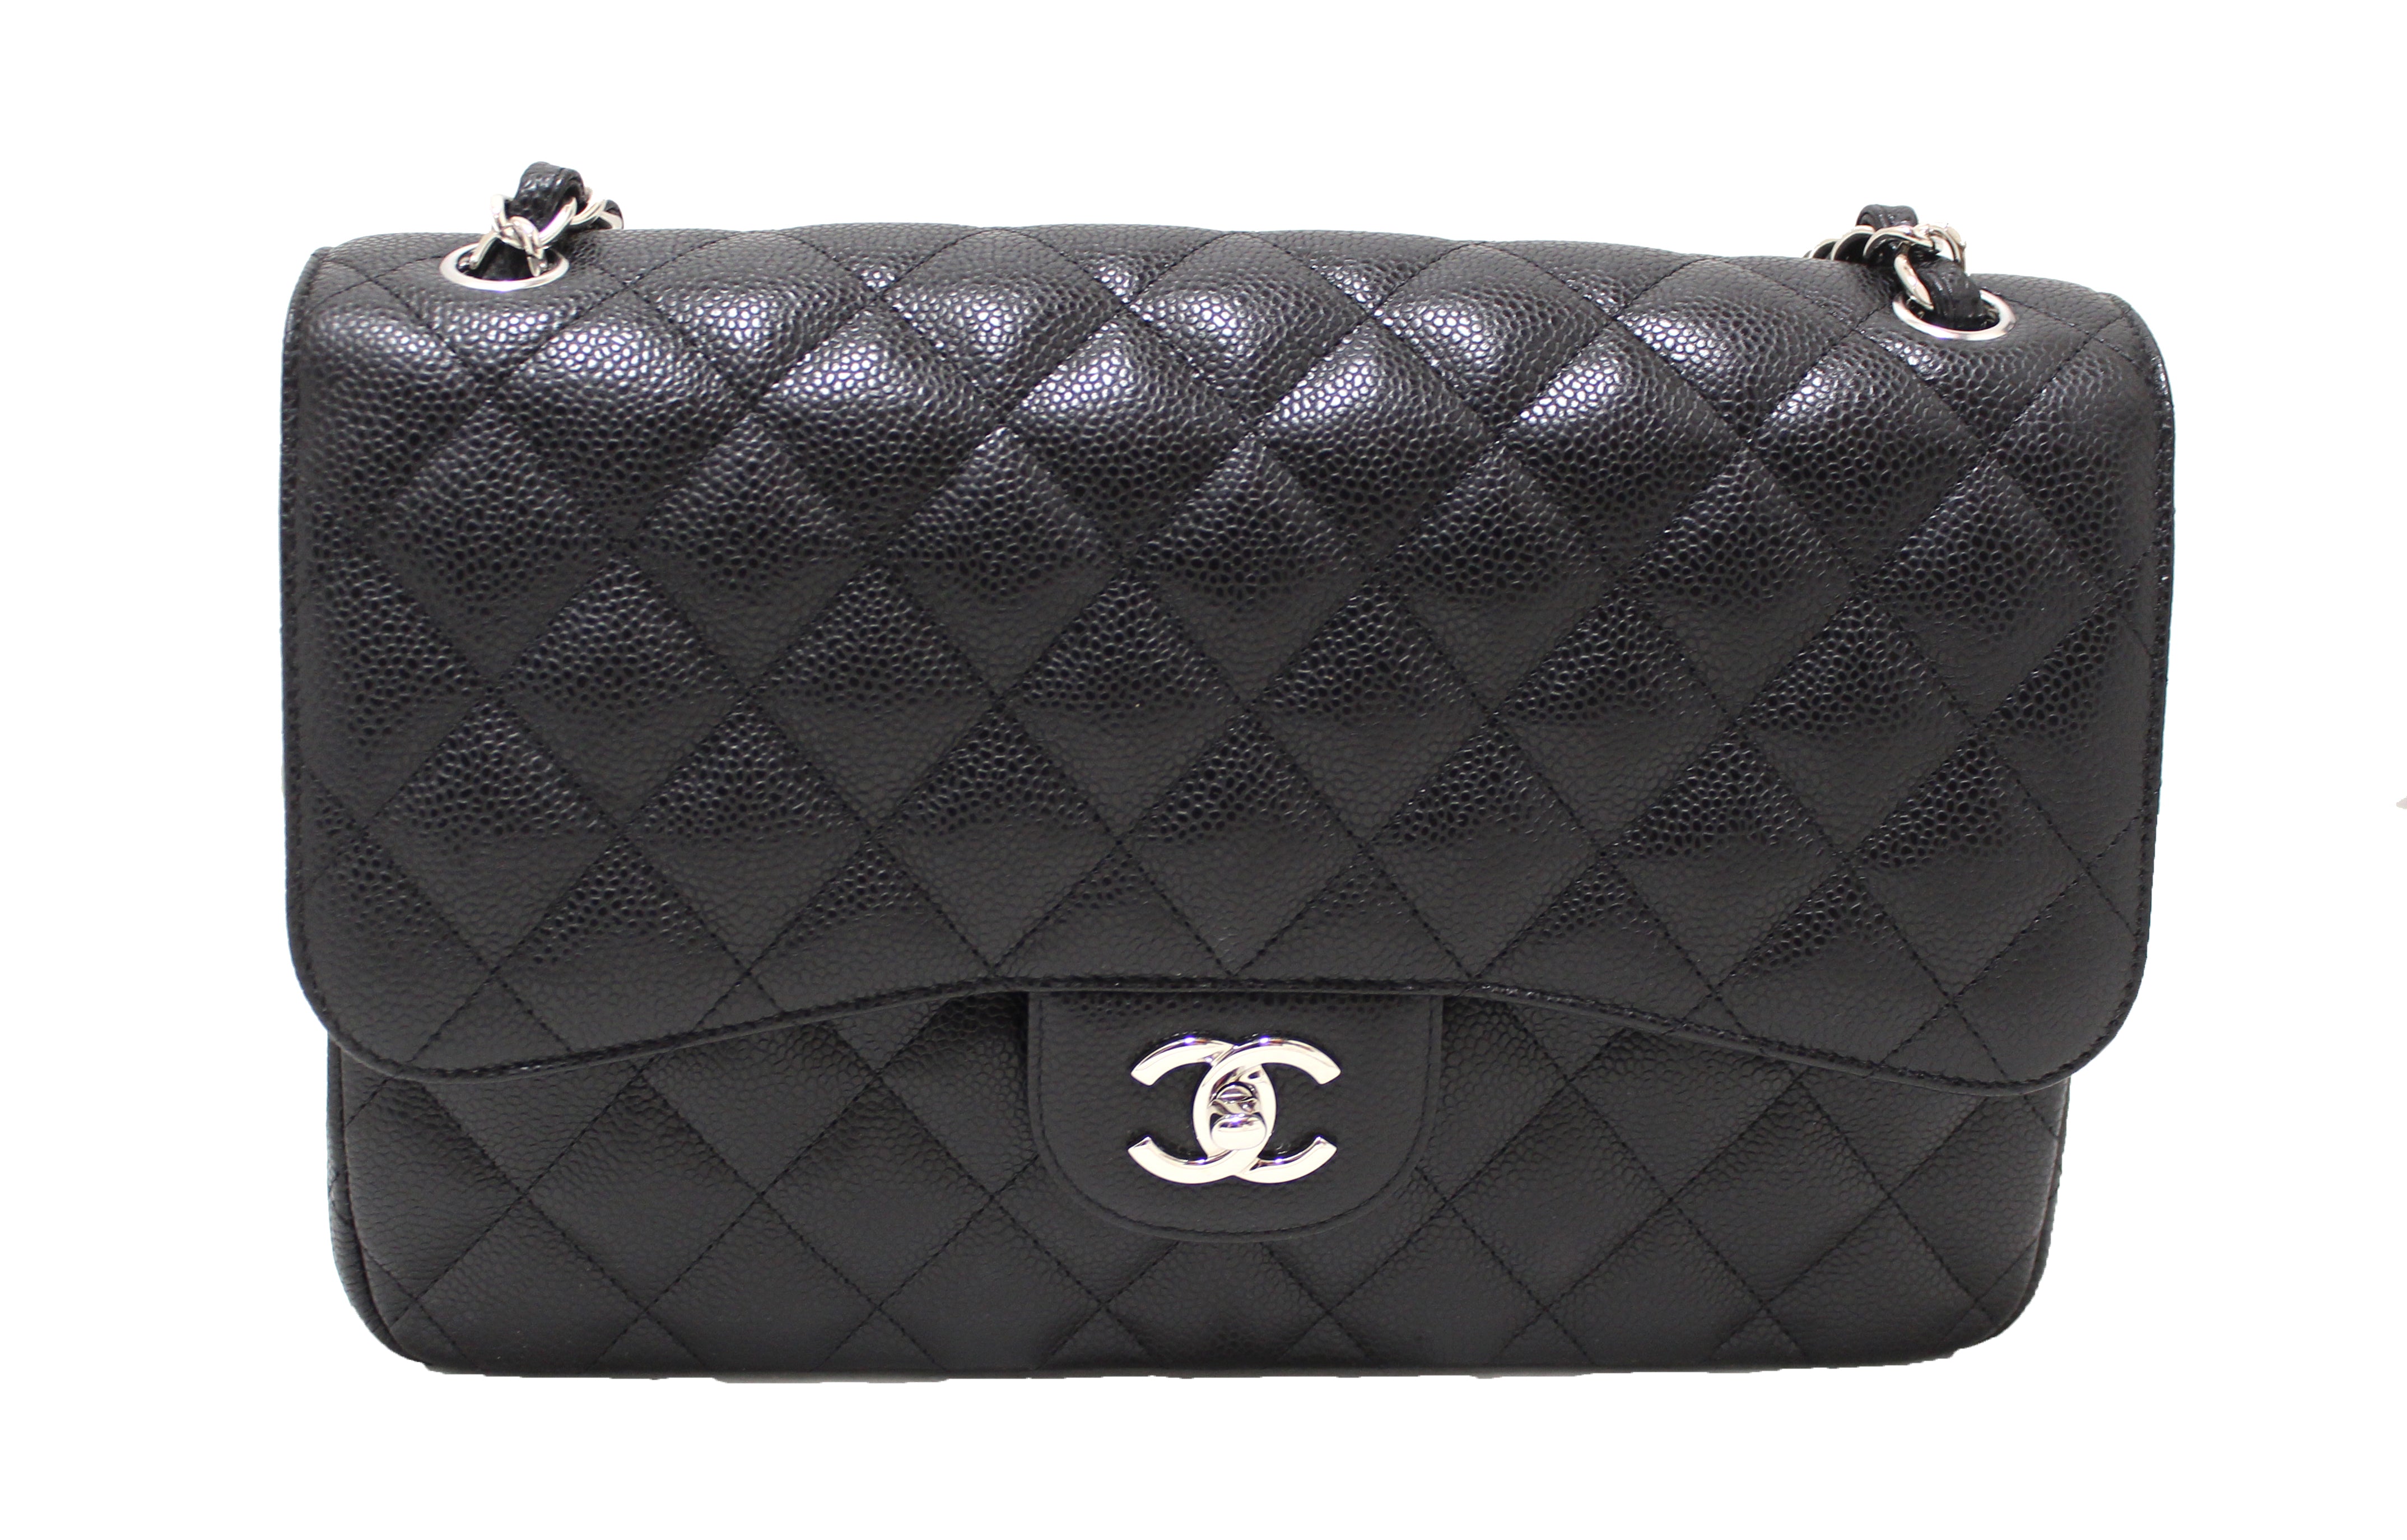 Authentic Chanel Black Quilted Caviar Leather Classic Jumbo Double